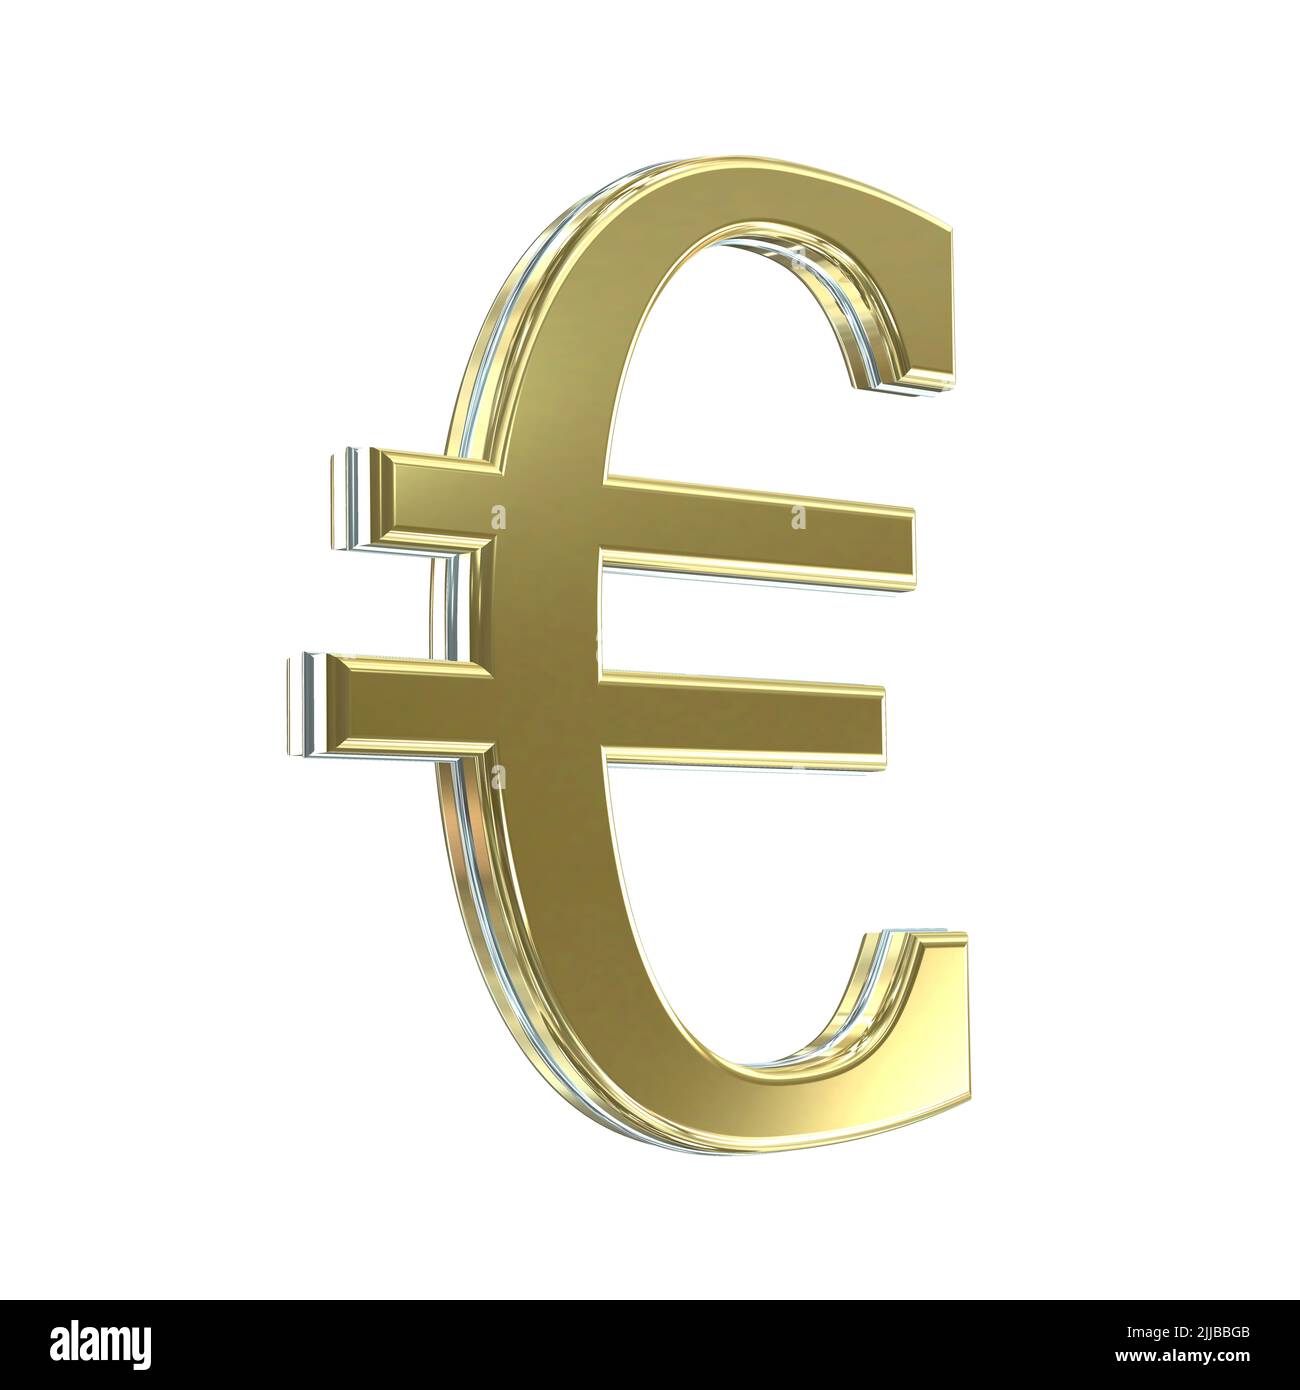 3D gold silver euro currency symbol symbols sign signs cut out isolated on white background Stock Photo